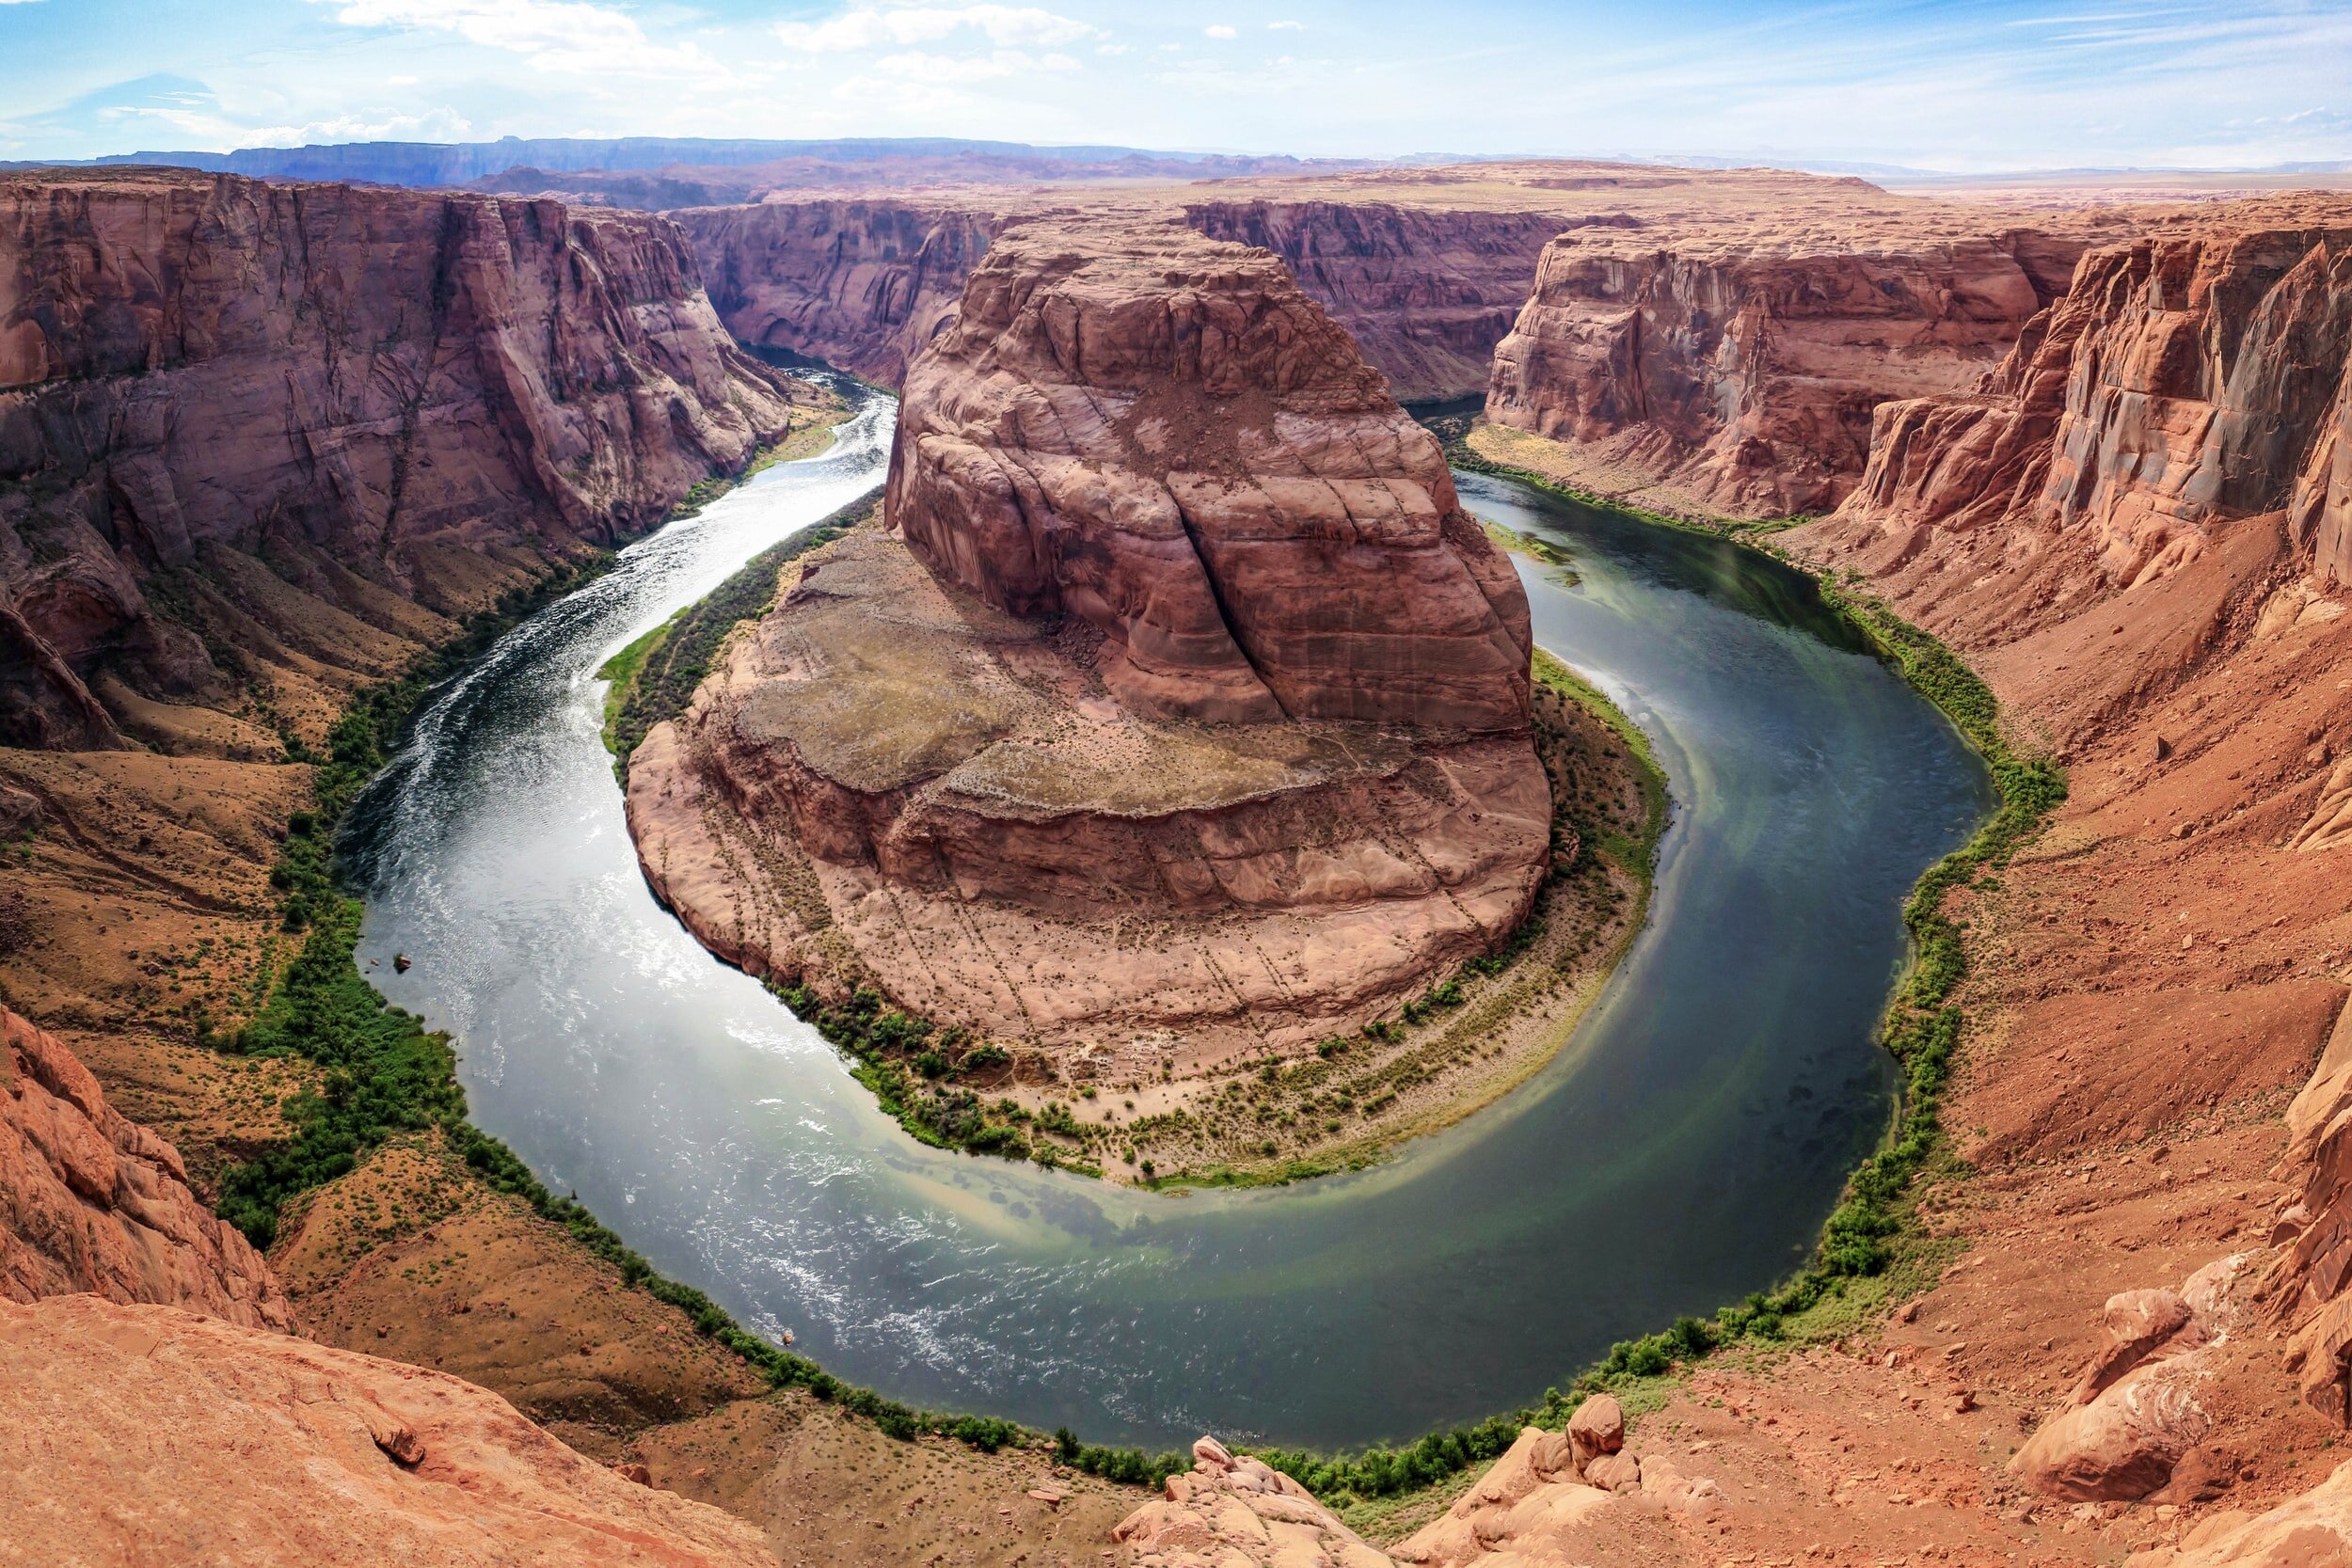   A Masterpiece of Nature    Horseshoe Bend    And the Colorado River  